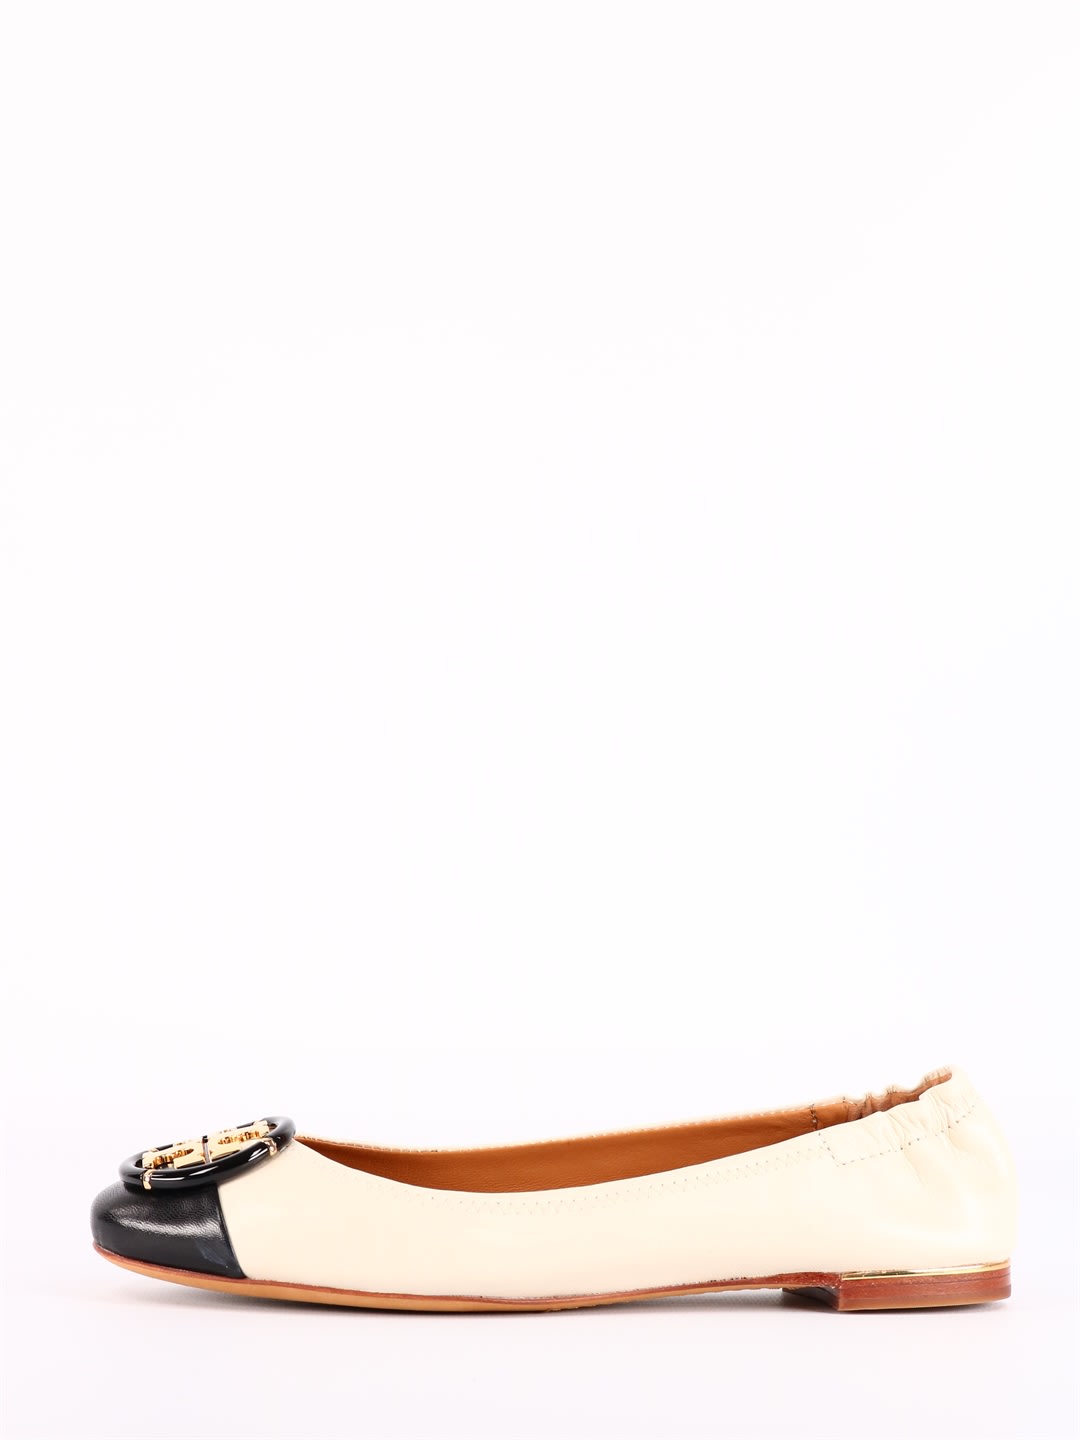 Buy Tory Burch Bicolor Logo Ballerina online, shop Tory Burch shoes with free shipping